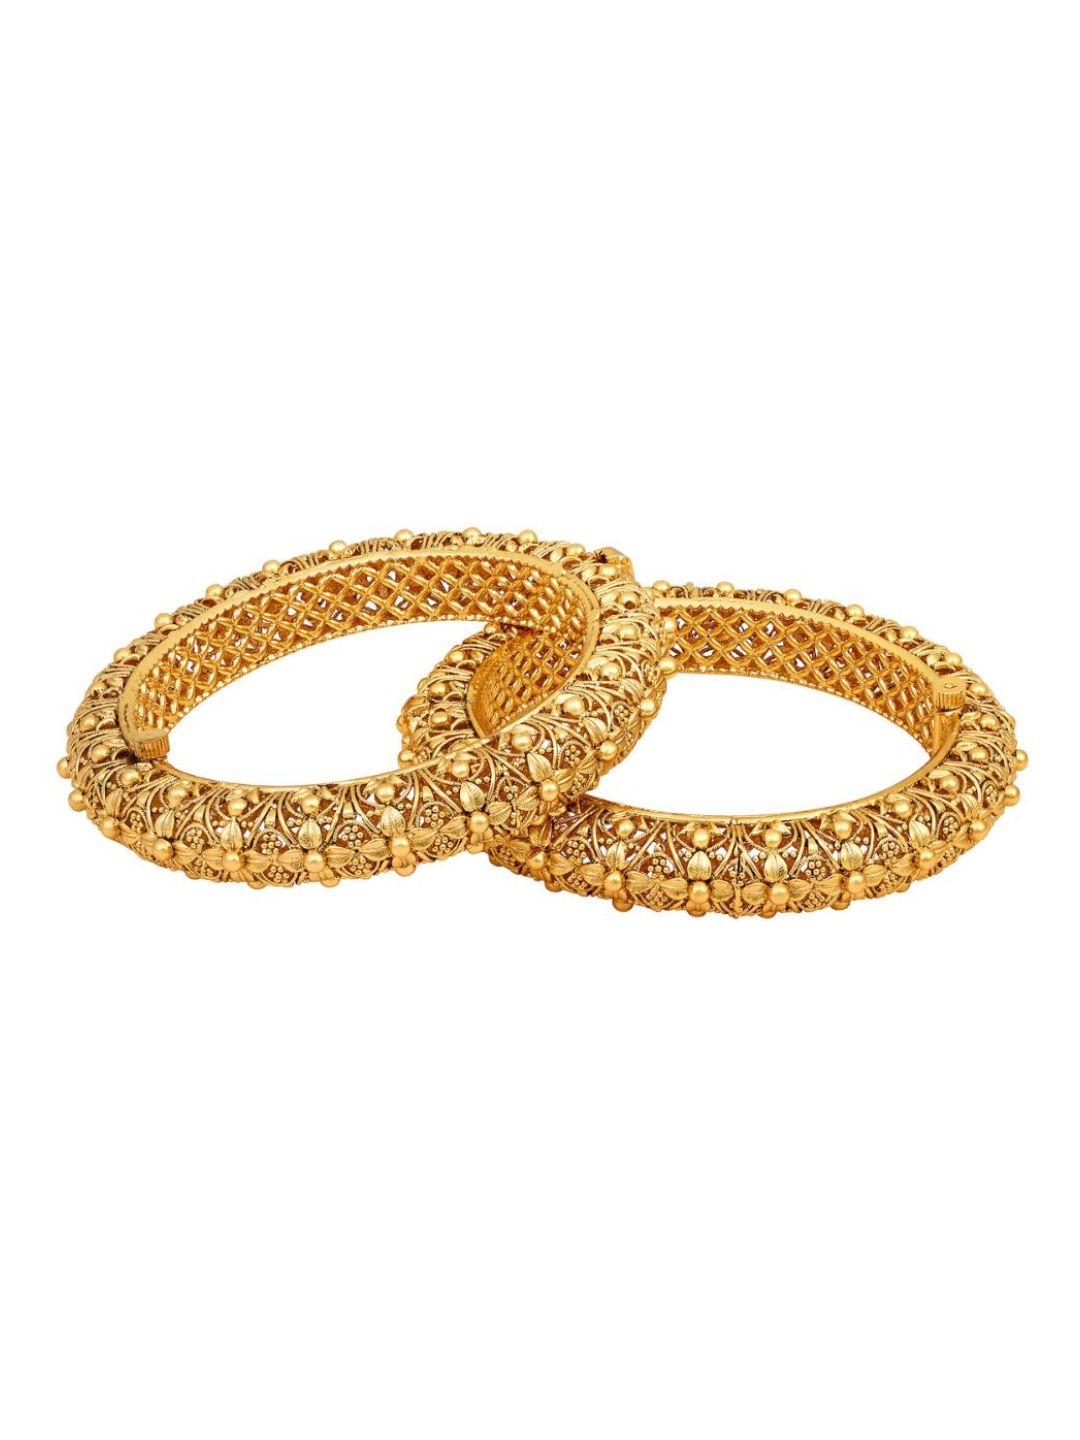 ACCESSHER Gold Plated Traditional and Ethnic Jewellery Inspired Antique Finish Screw Closure Statement Kada/Bangles/Festive Bangles Set of 2 for Women